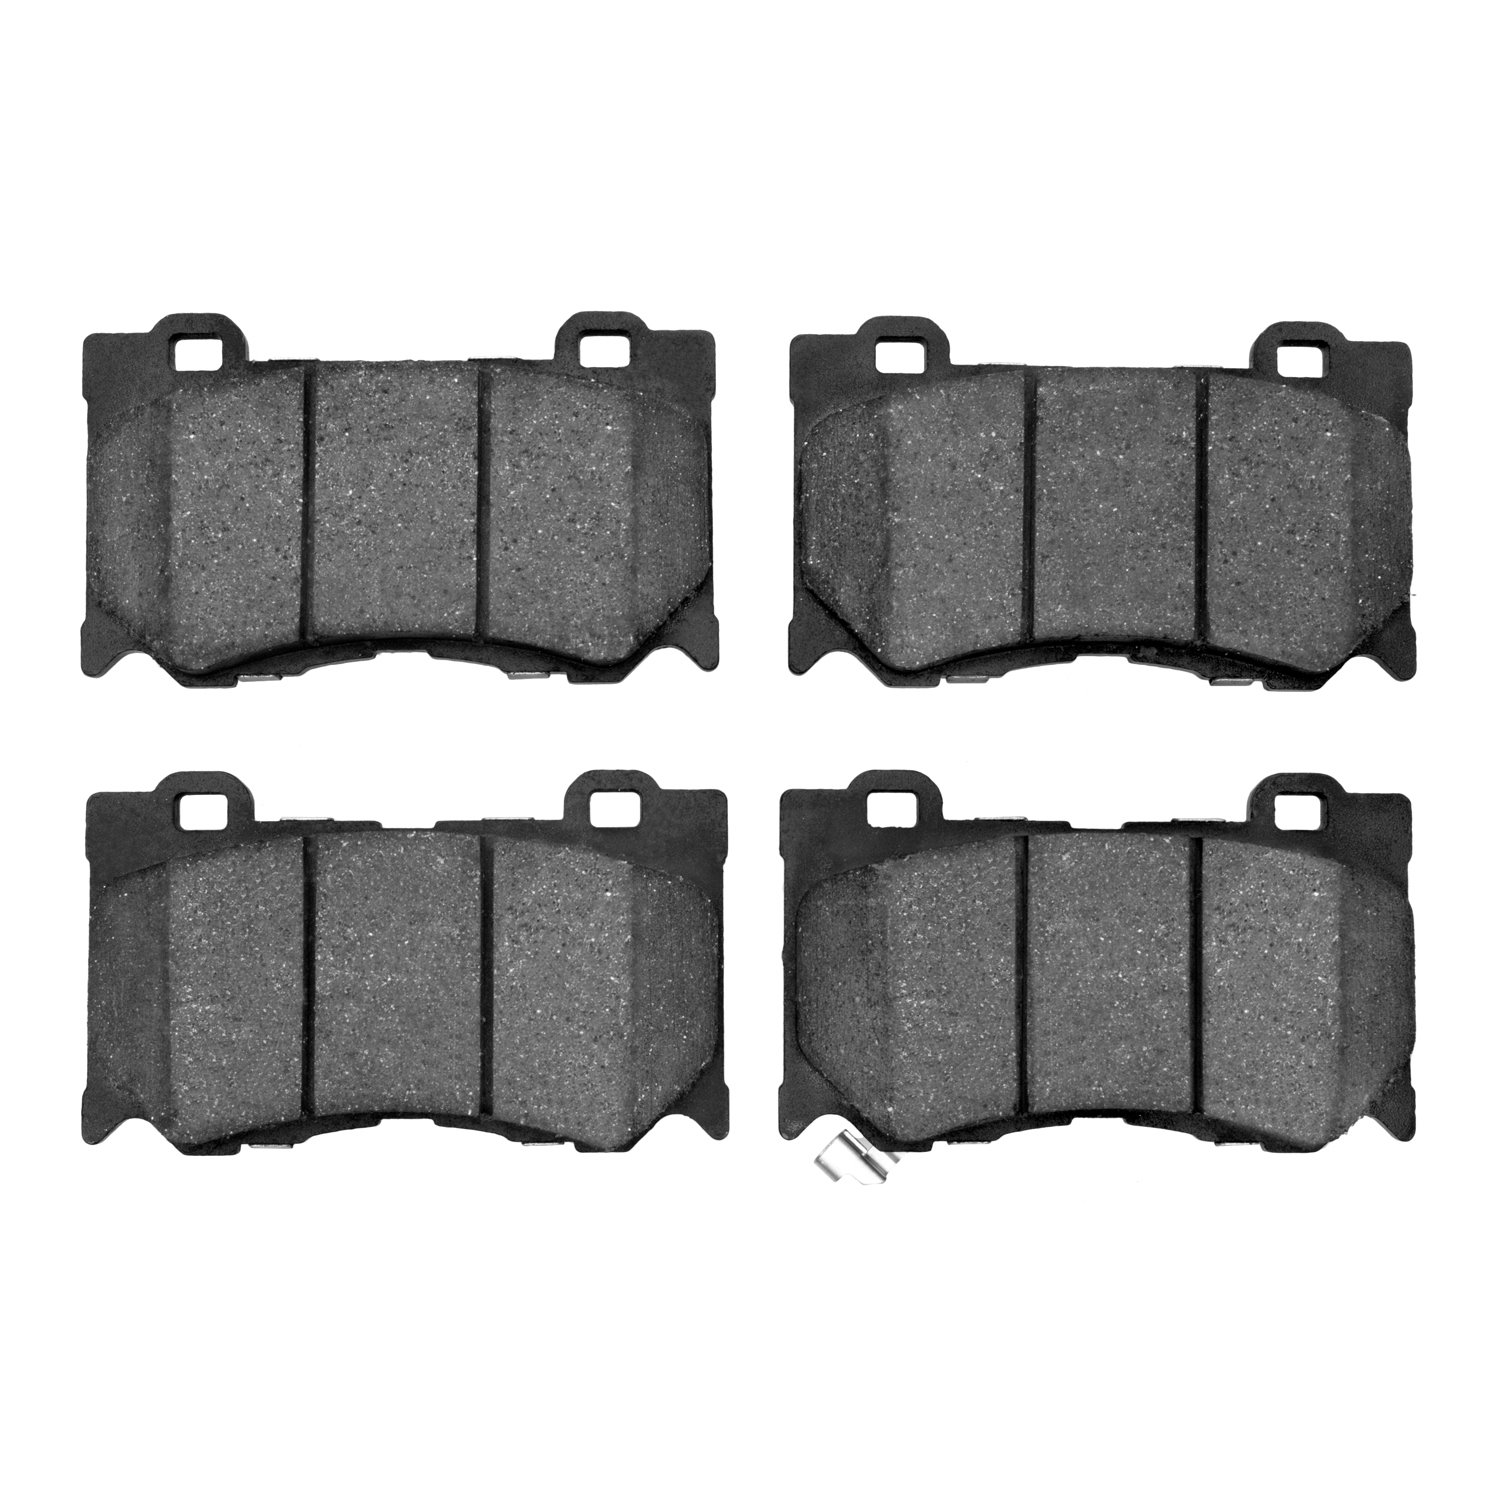 1551-1346-00 5000 Advanced Ceramic Brake Pads, Fits Select Infiniti/Nissan, Position: Front